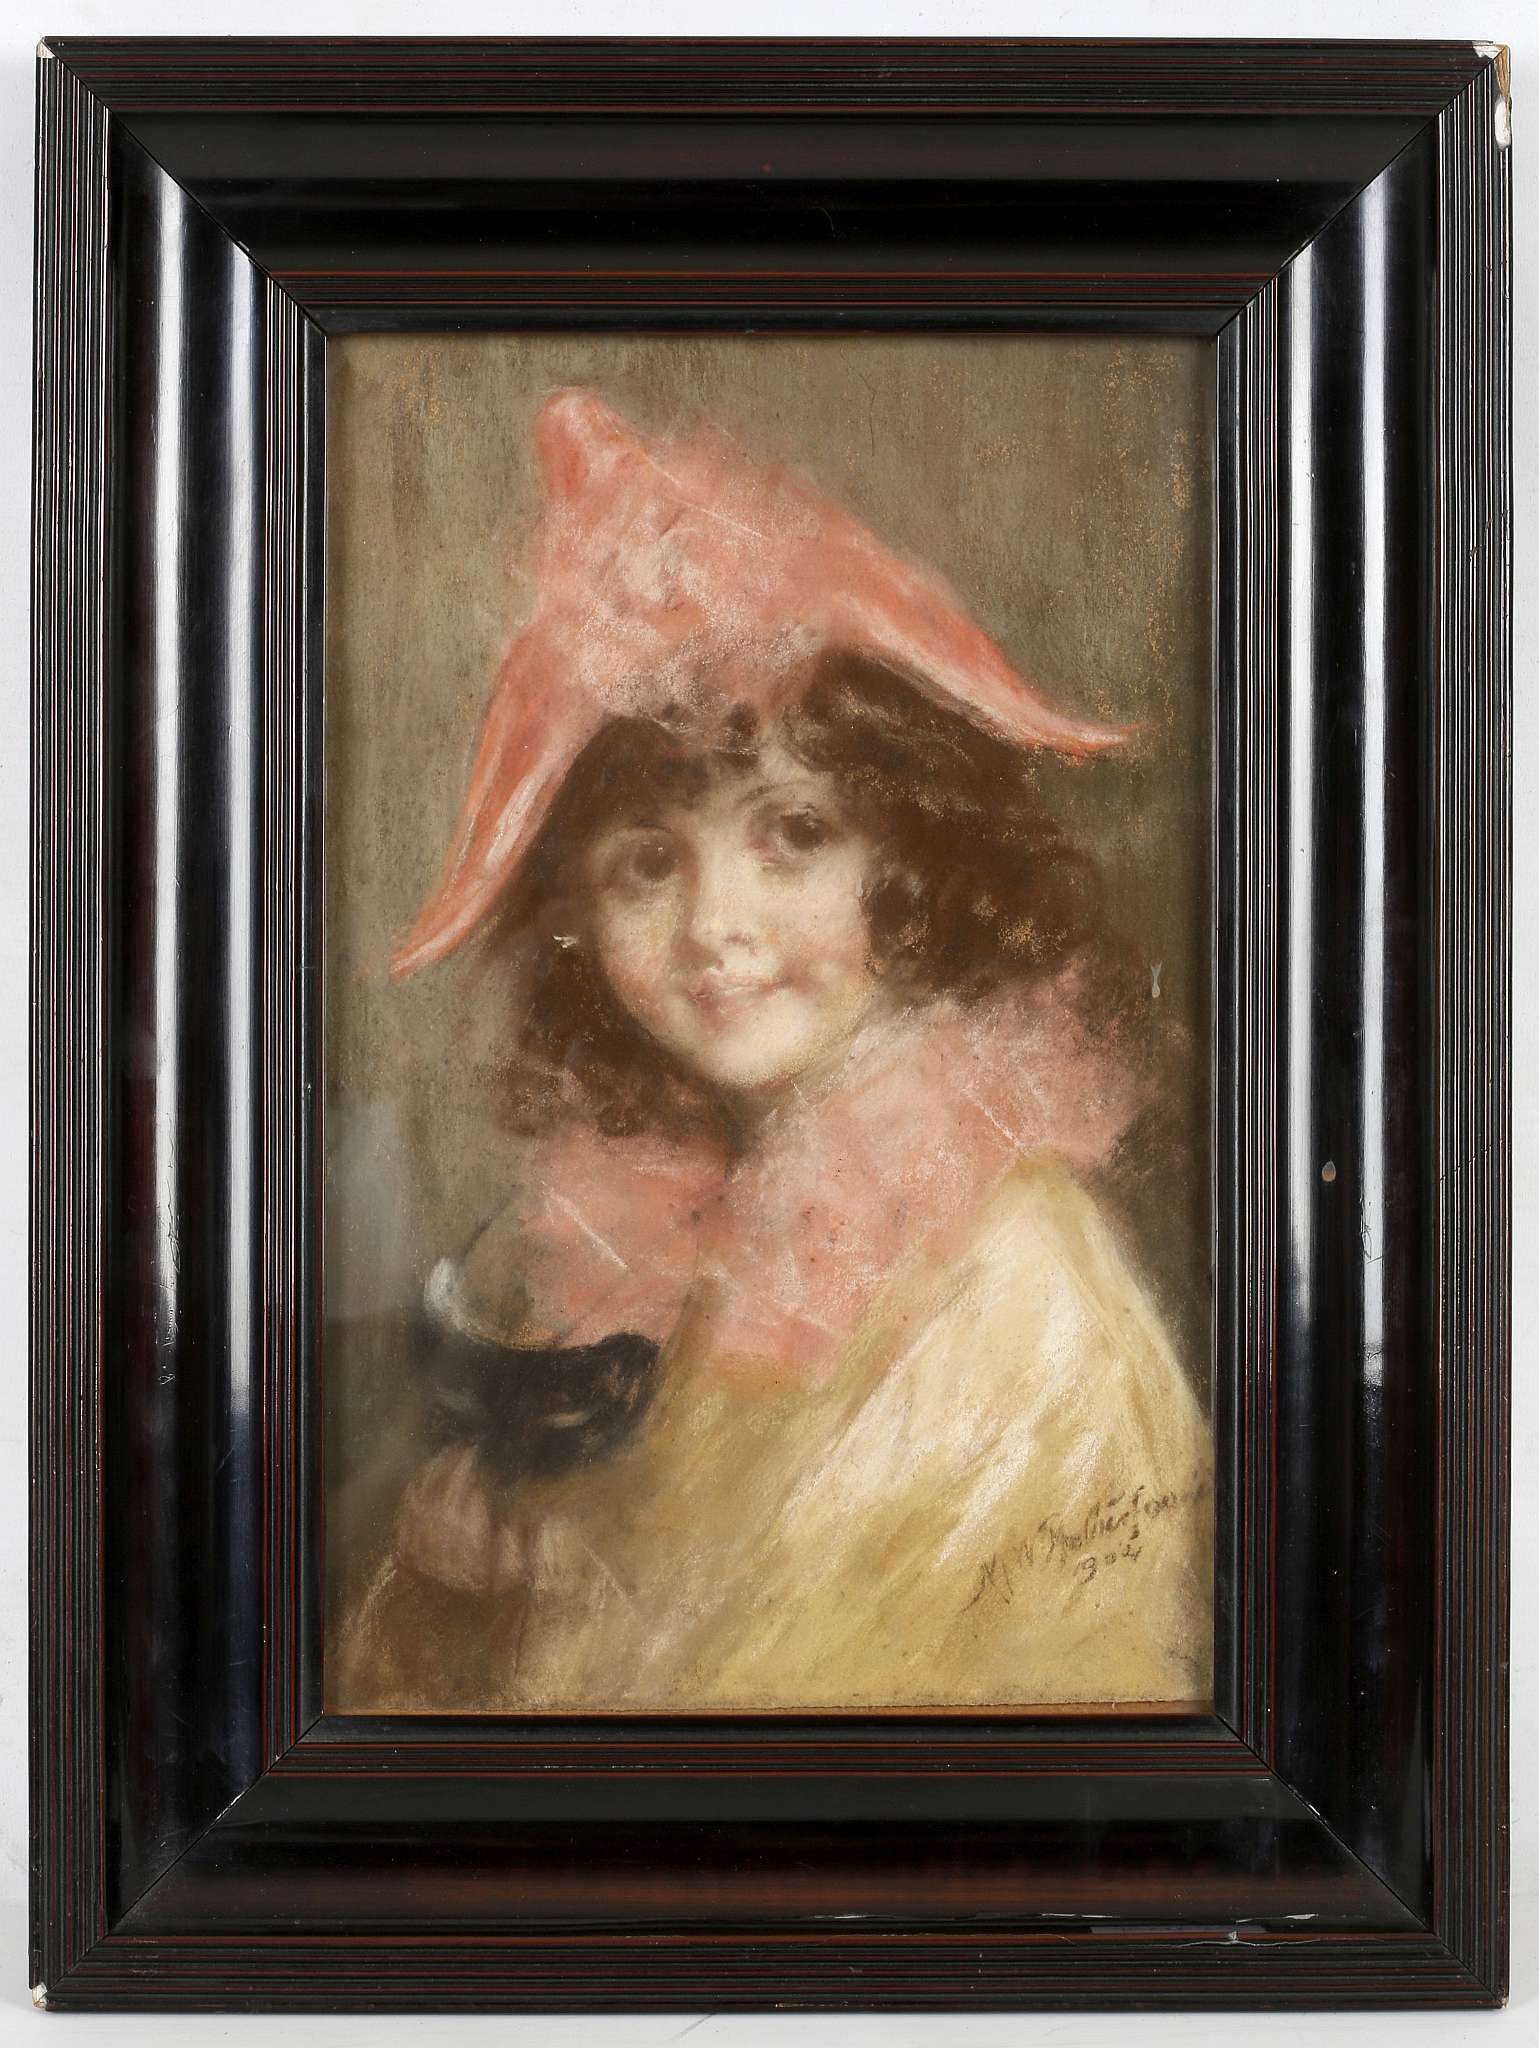 Mary W. Rutherford, early 20th Century British, 'Portrait of a Young Girl as a Harlequin', pastel on